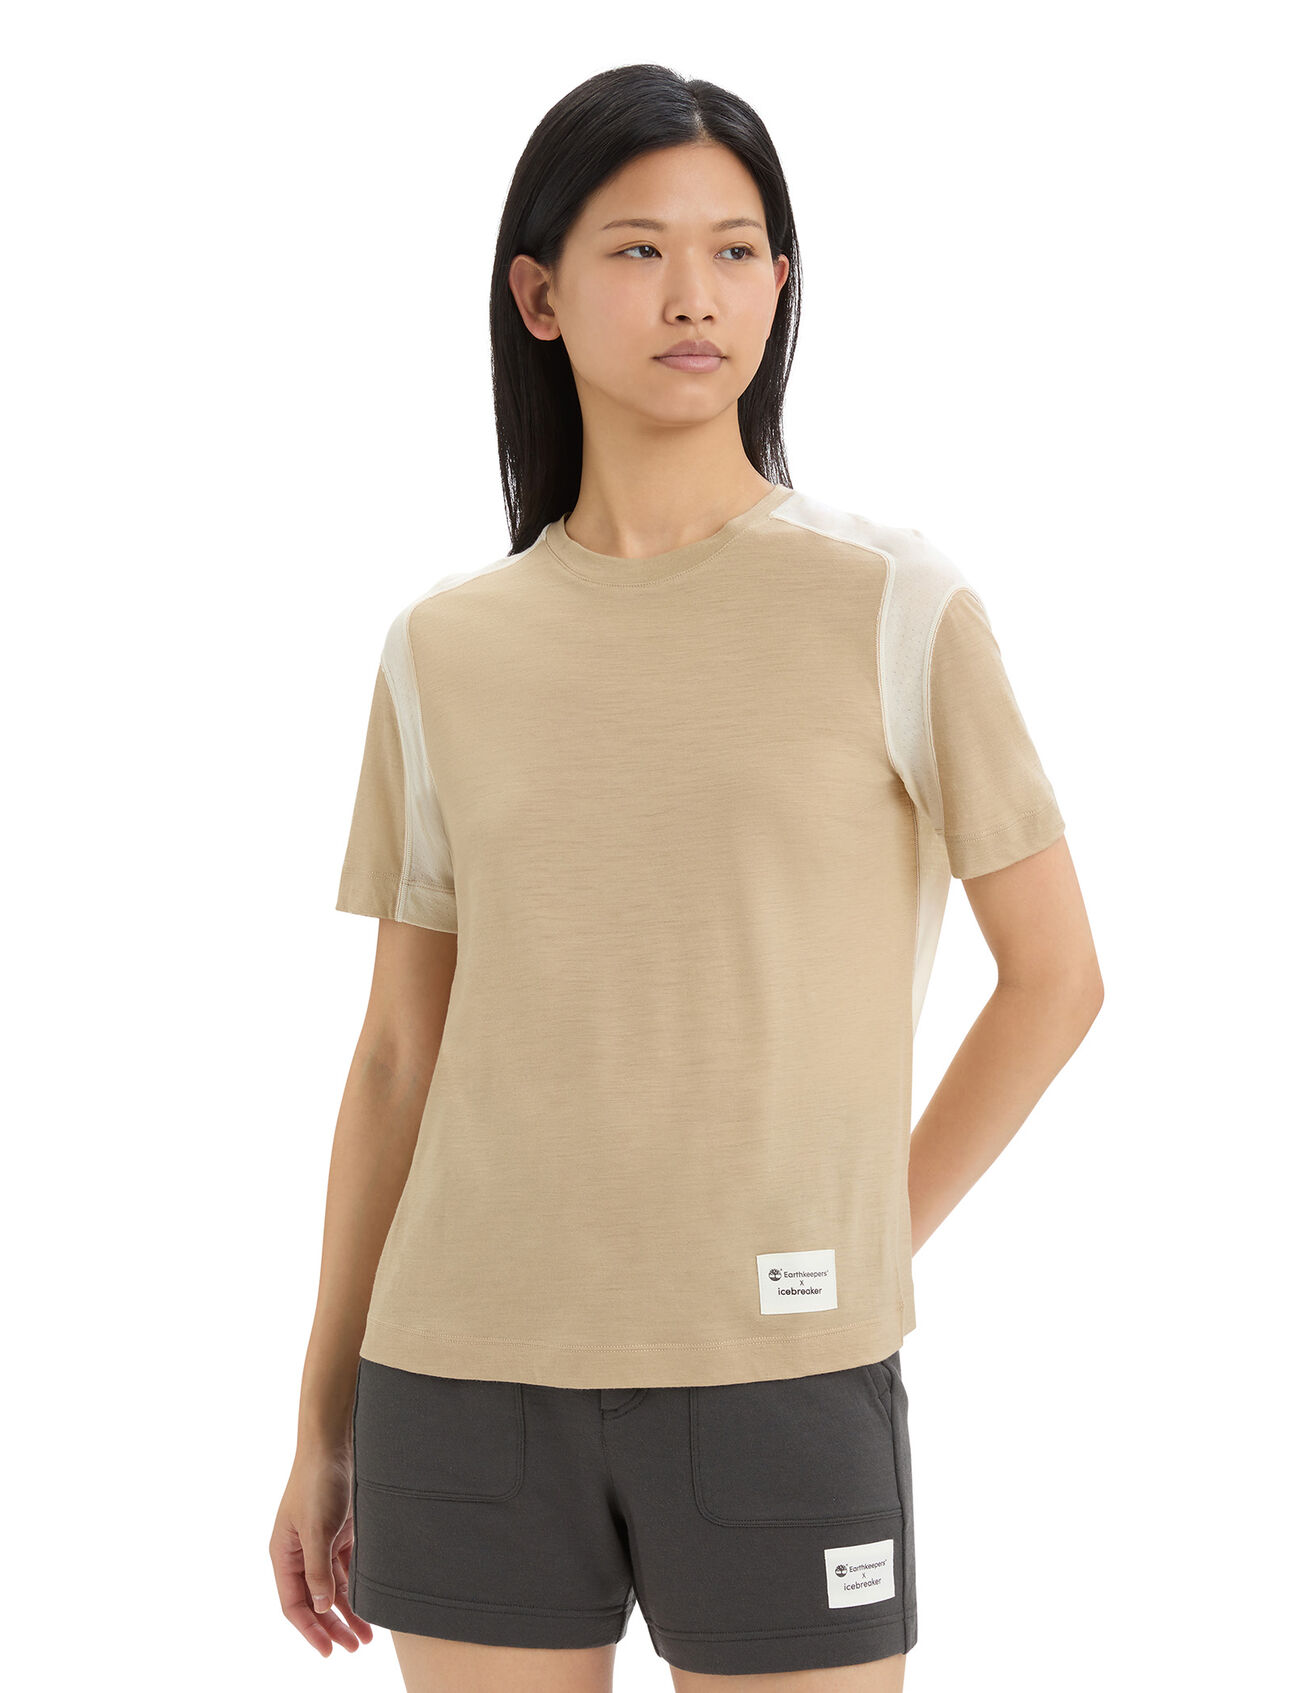 Womens Timberland x icebreaker Merino ZoneKnit™ Short Sleeve T-Shirt Designed in collaboration with Timberland, the Timberland x icebreaker Merino ZoneKnit™ Short Sleeve Tee is a clean, breathable and lightweight top with mesh panels to help regulate your body temperature.